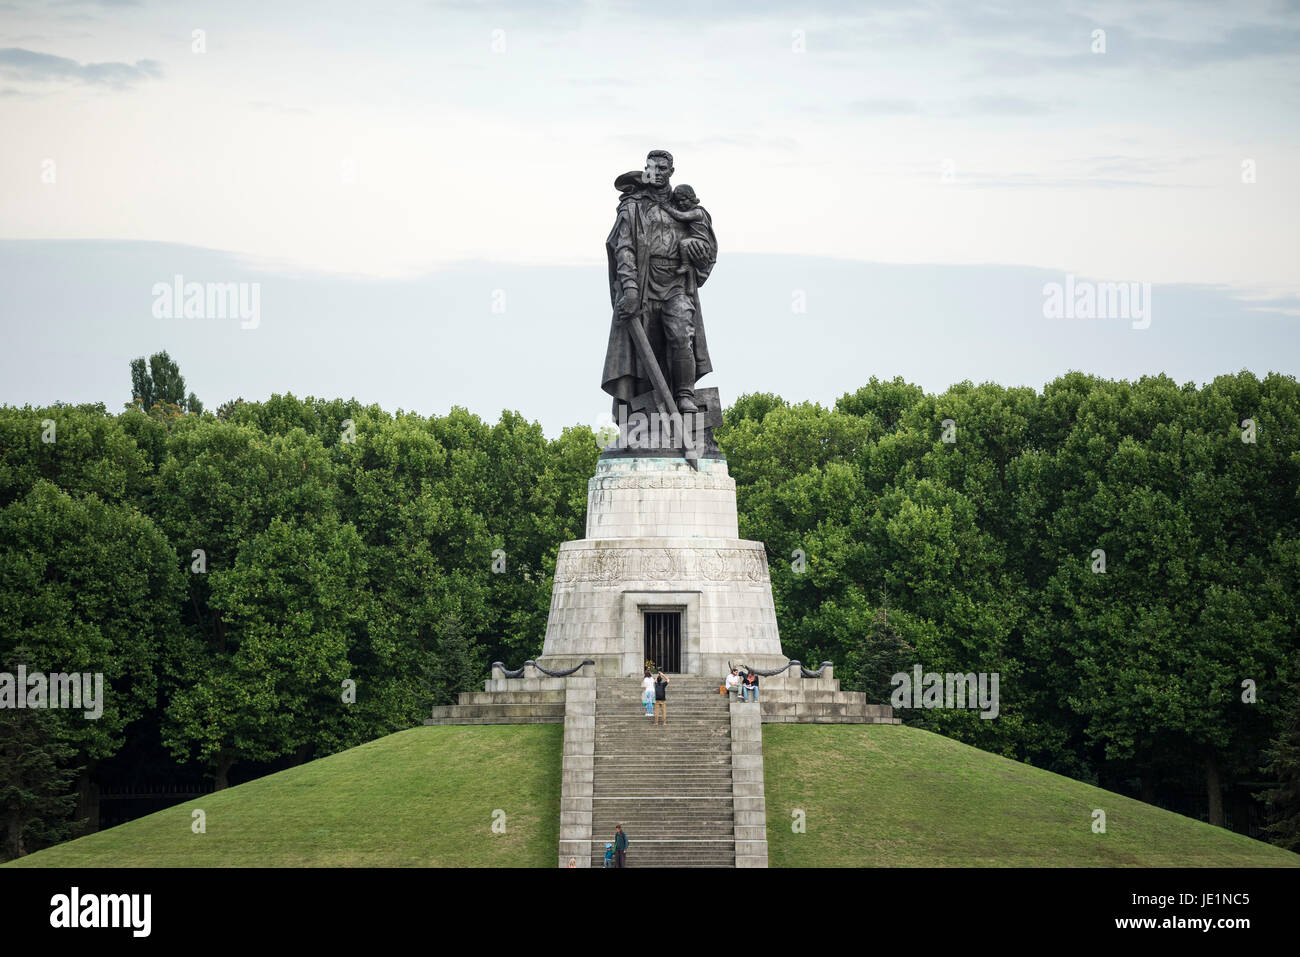 Berlin. Germany. Soviet War Memorial in Treptower Park, commemorates Soviet soldiers who fell in the Battle of Berlin, Apr-May 1945. Built (1949) to t Stock Photo